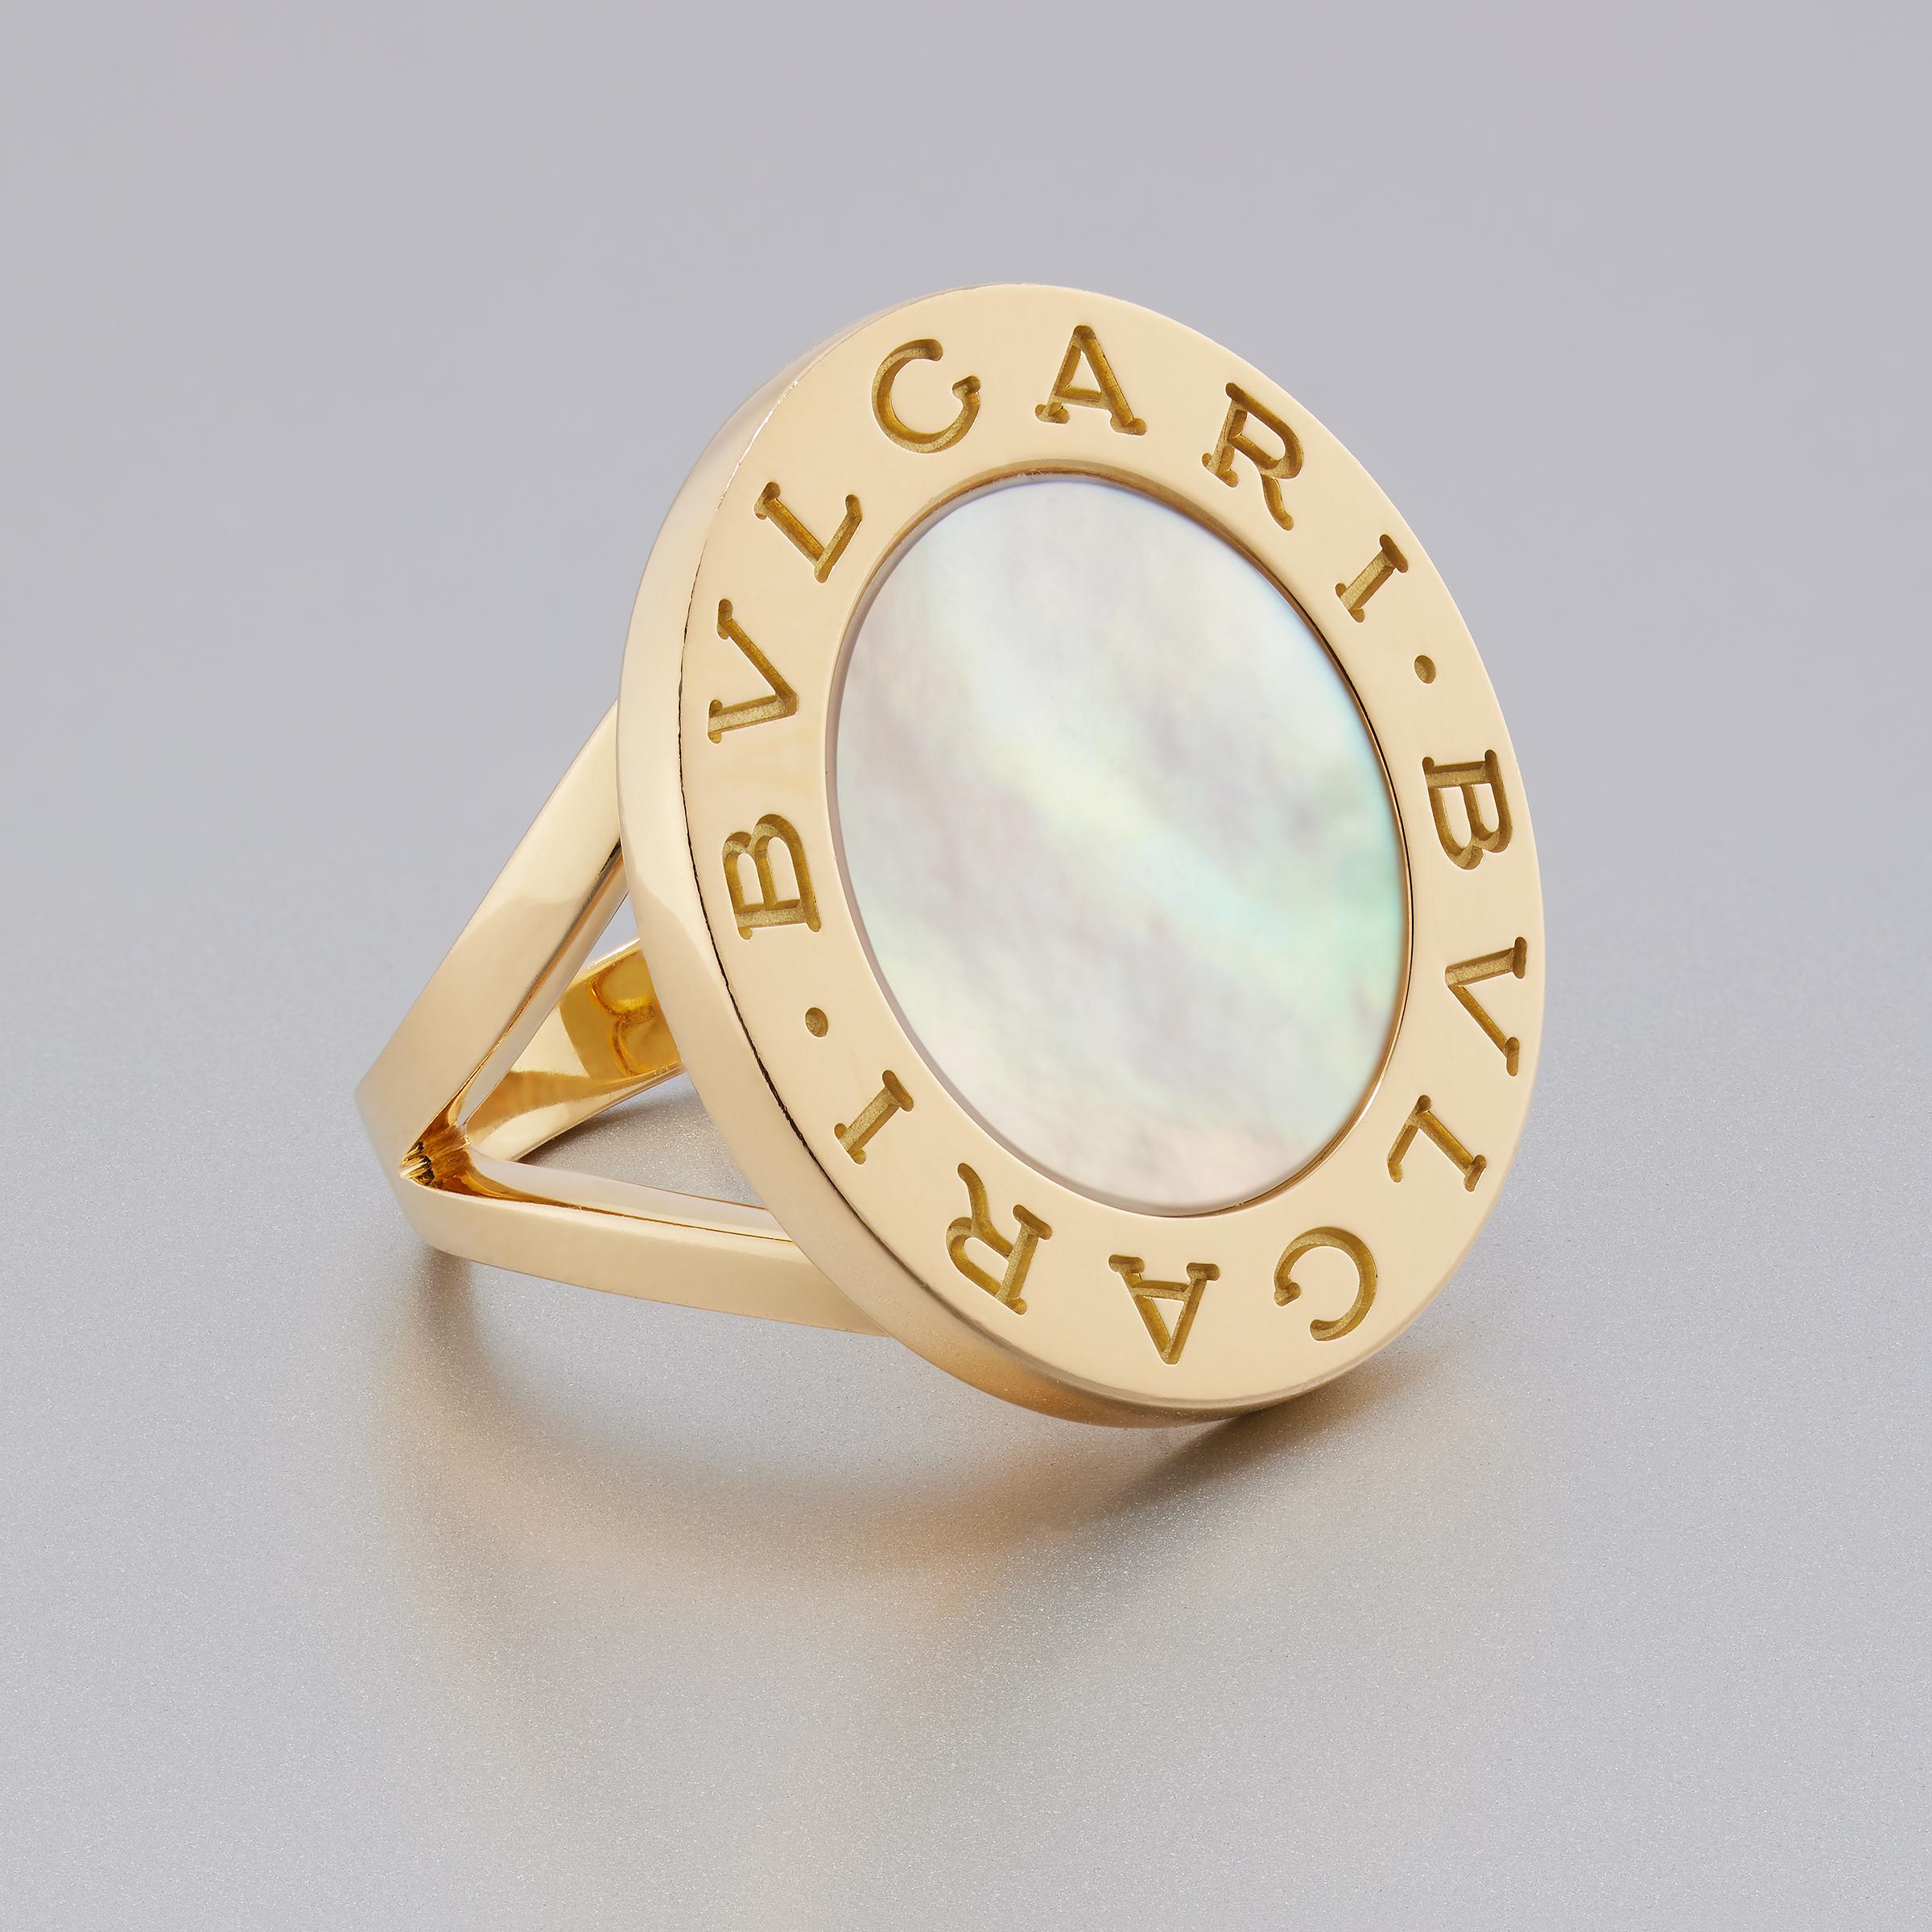 From iconic Bulgari comes this big, bold, and stylish ring featuring a mother-of-pearl center disk inlaid in luminous 18 karat yellow gold setting. Part of the Bvlgari Bvlgari collection, the ring features Bulgari’s trademark double logo engraved